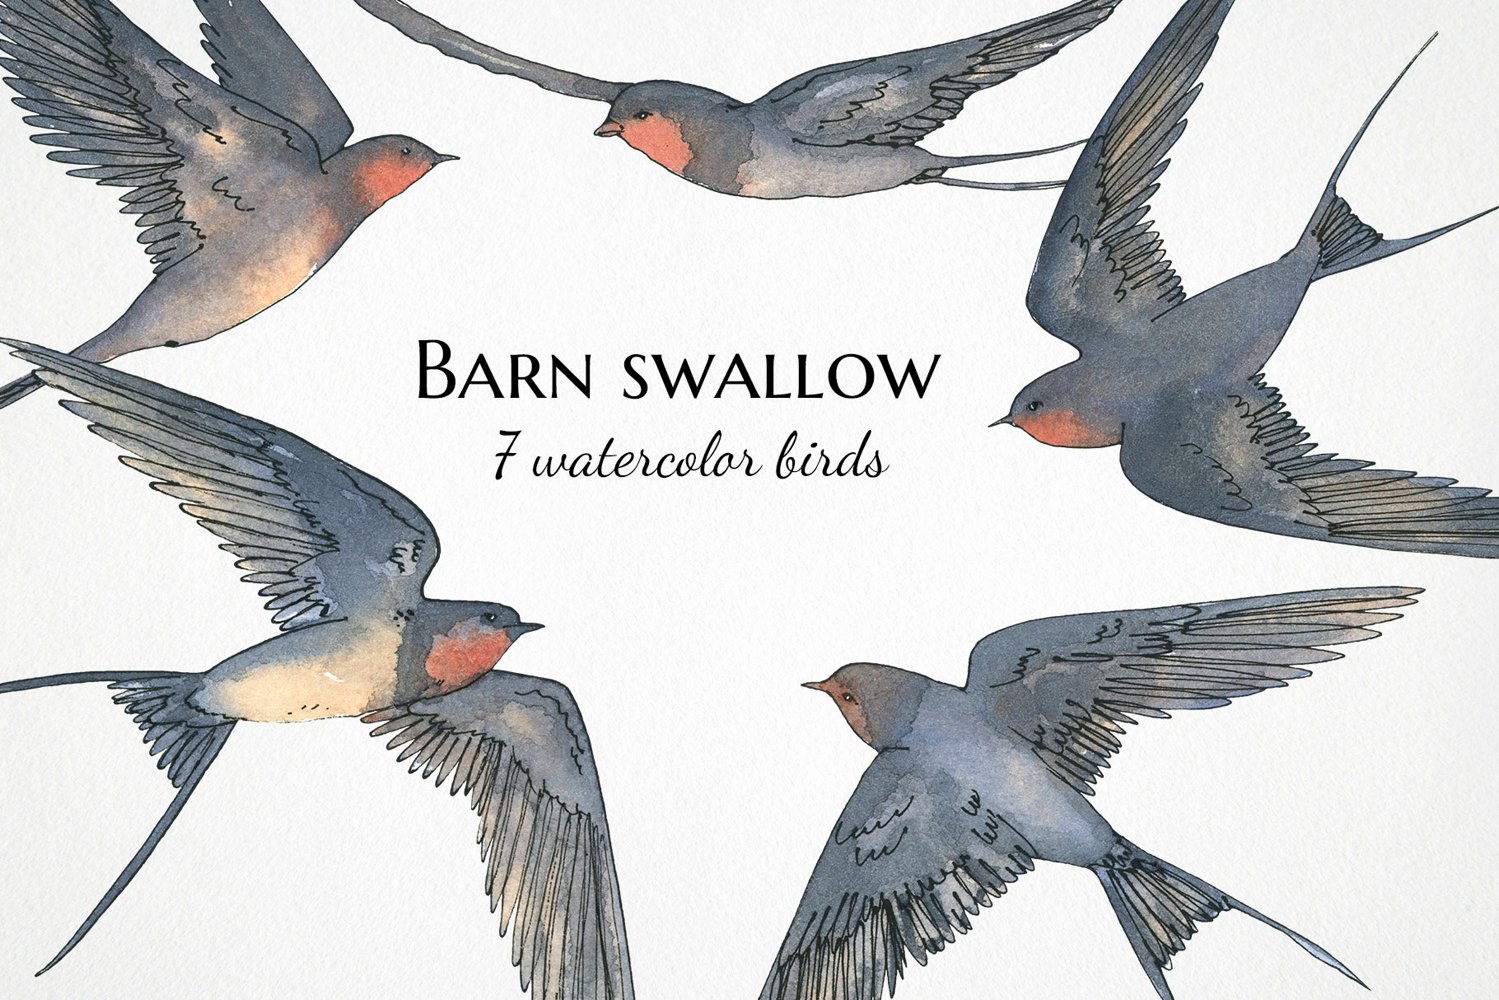 Cover image of barn swallow clipart.